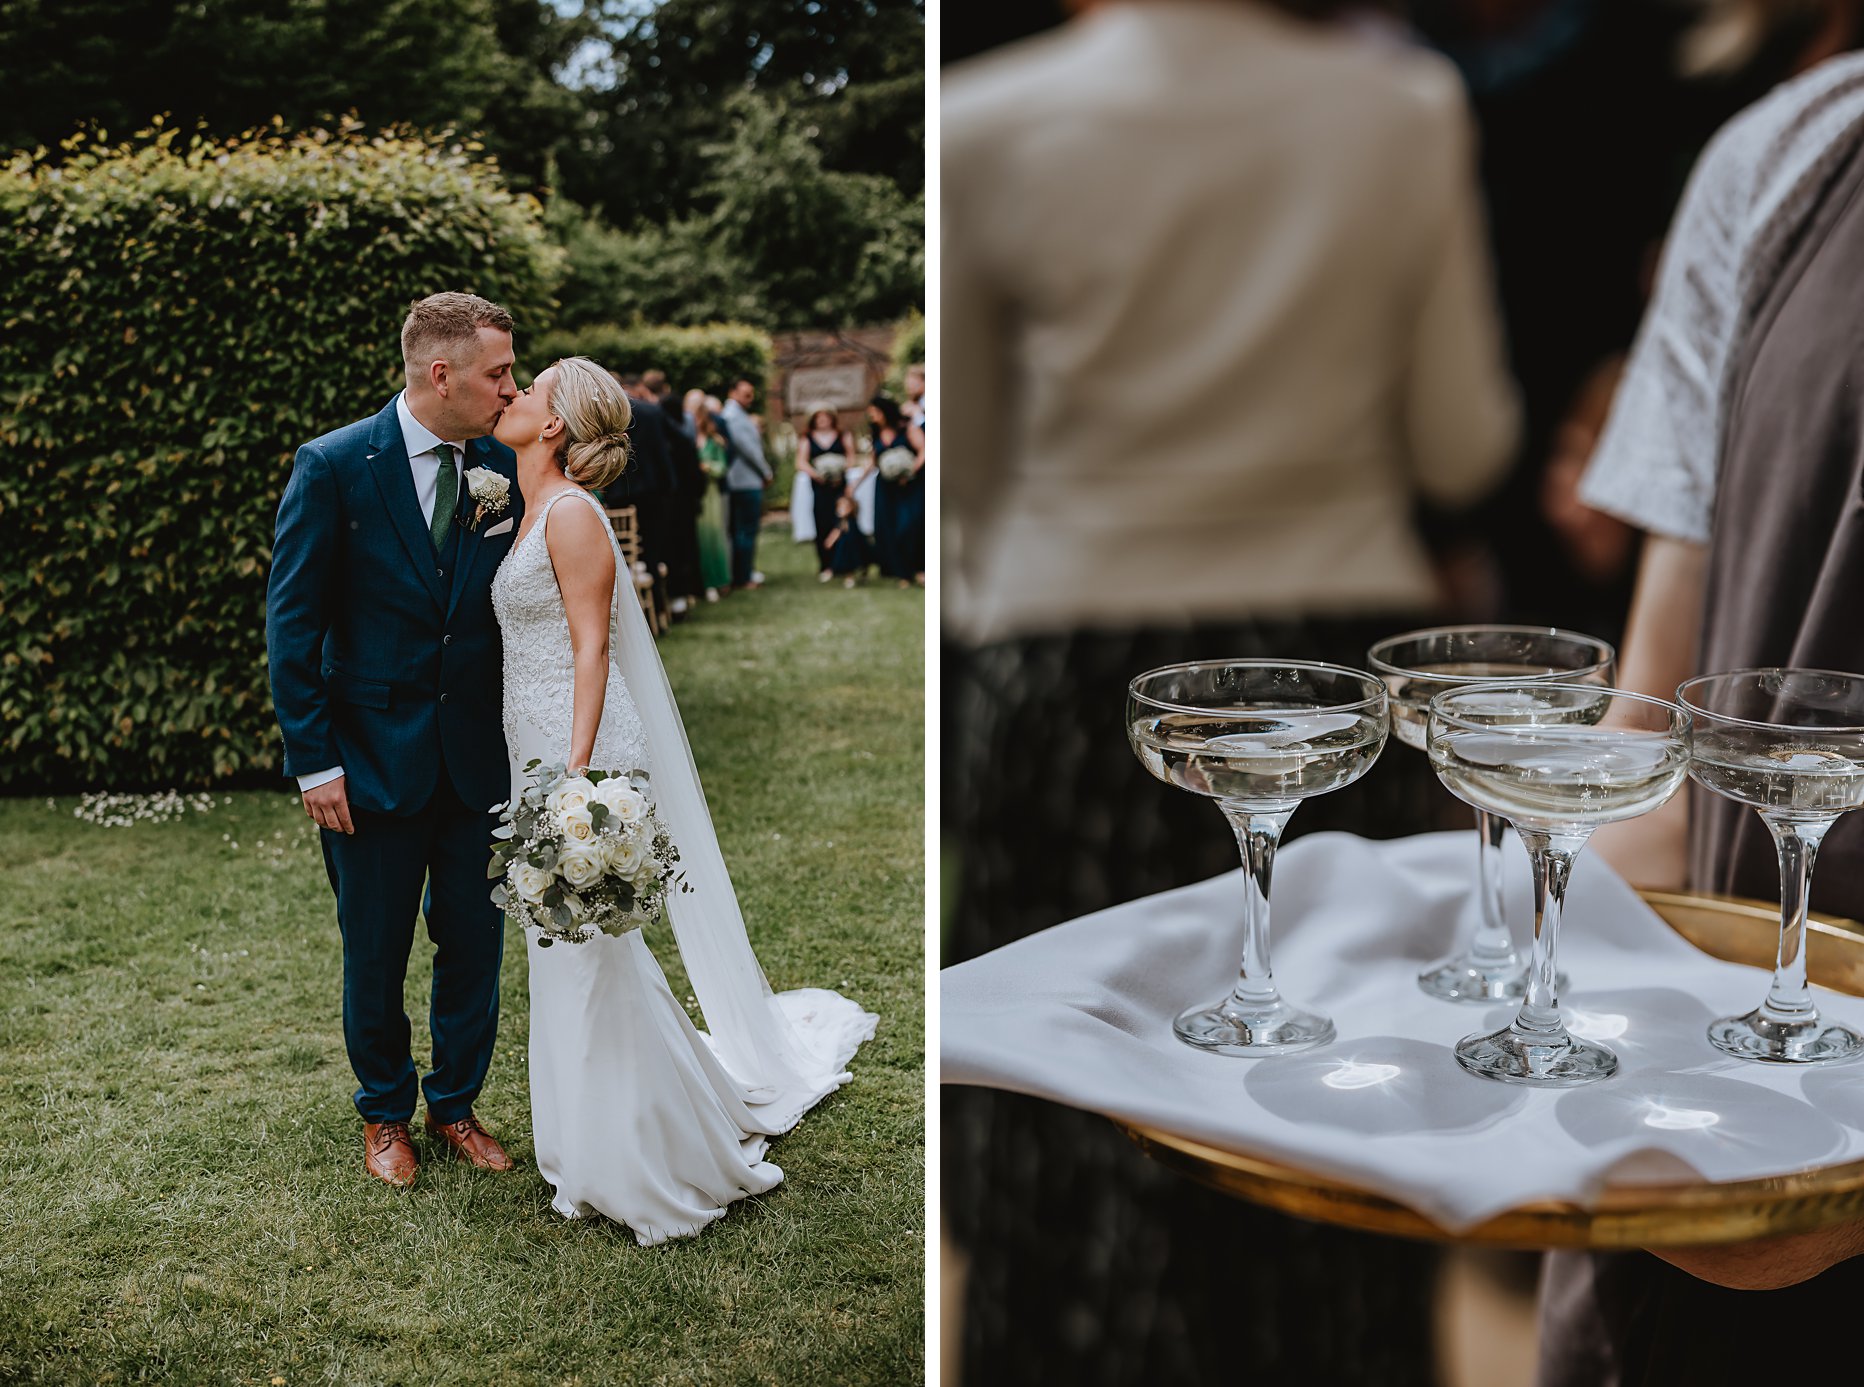 First photograph shows bride and groom sharing a kiss after walking down the aisle. They are outside in the gardens of Saltmarshe Hall. Bride is wearing a floor length white dress and holding a bouquet of green and white flowers. Groom is wearing a navy suit and tan shoes. Second photograph is a tray of champagne glasses being served by a waiter at Saltmarshe Hall.